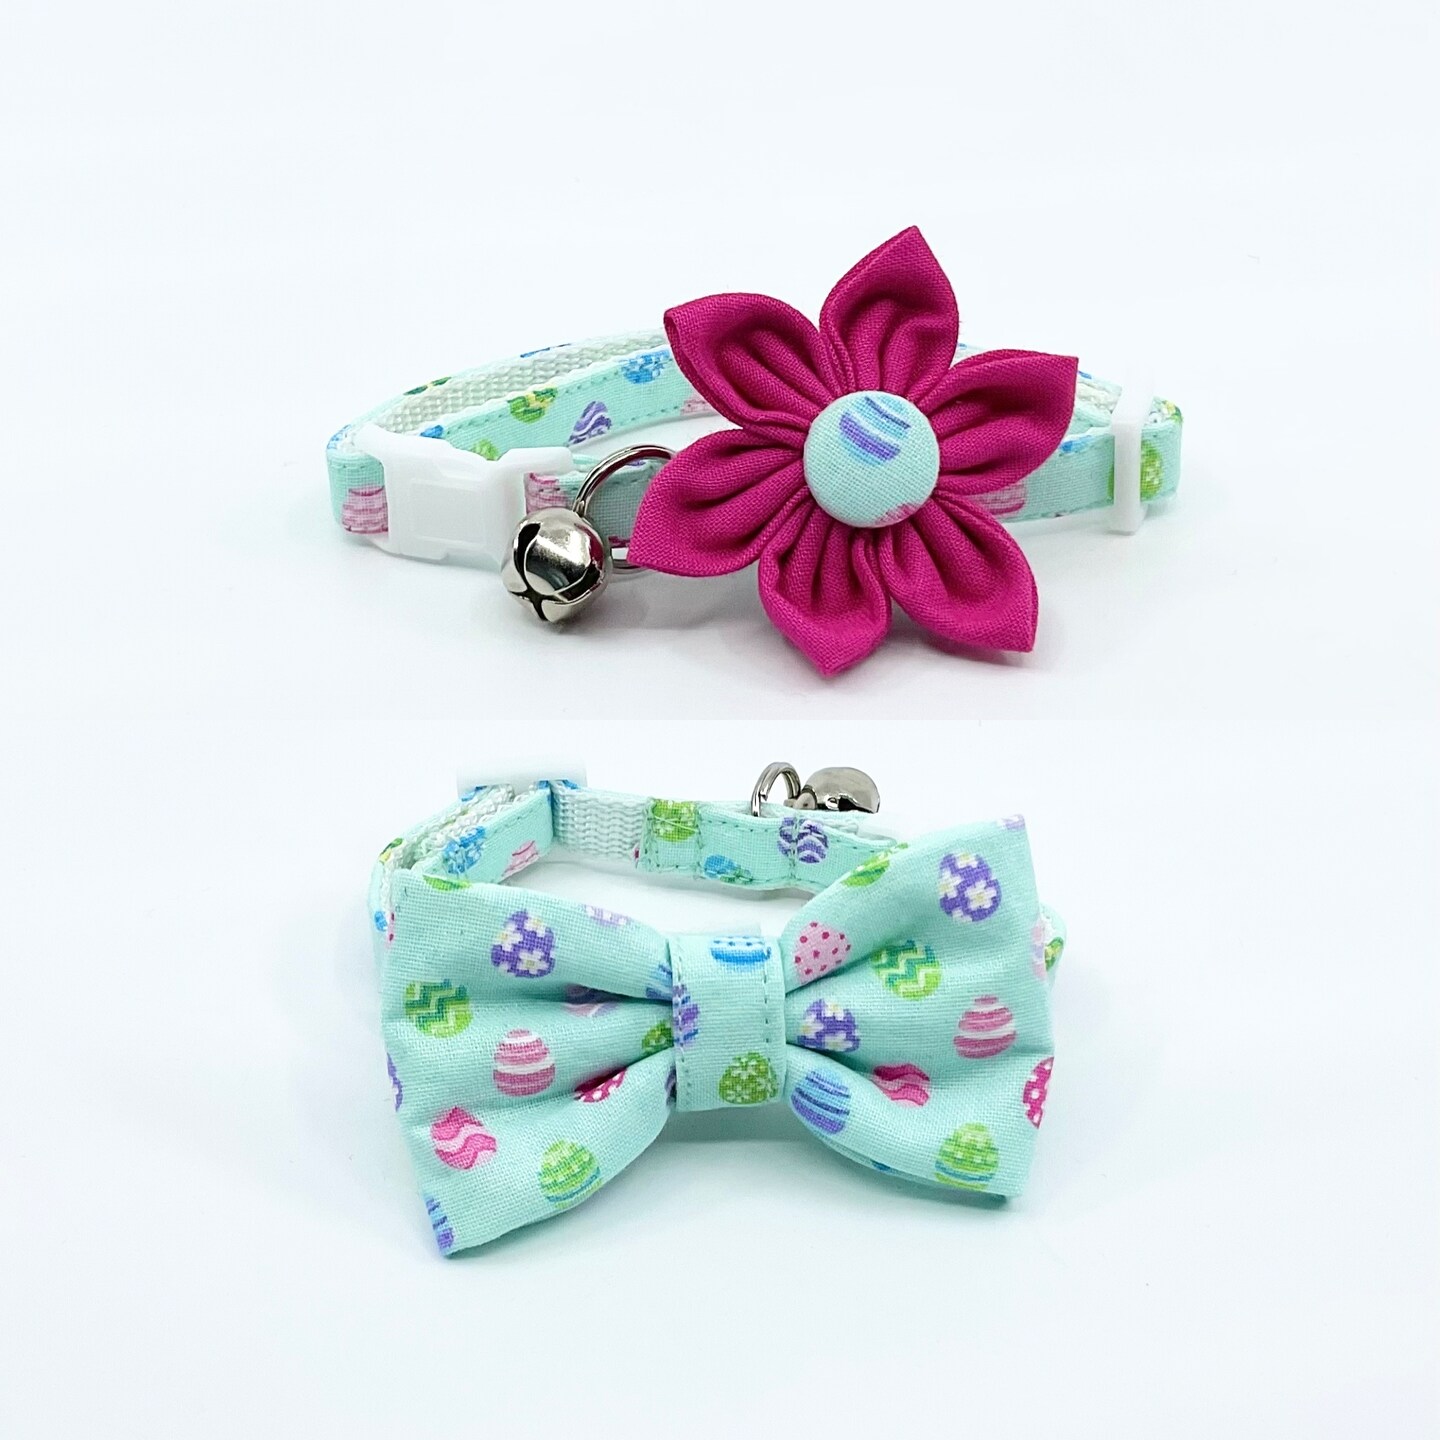 Mint Green Floral Pattern Band Collar Bow Tie